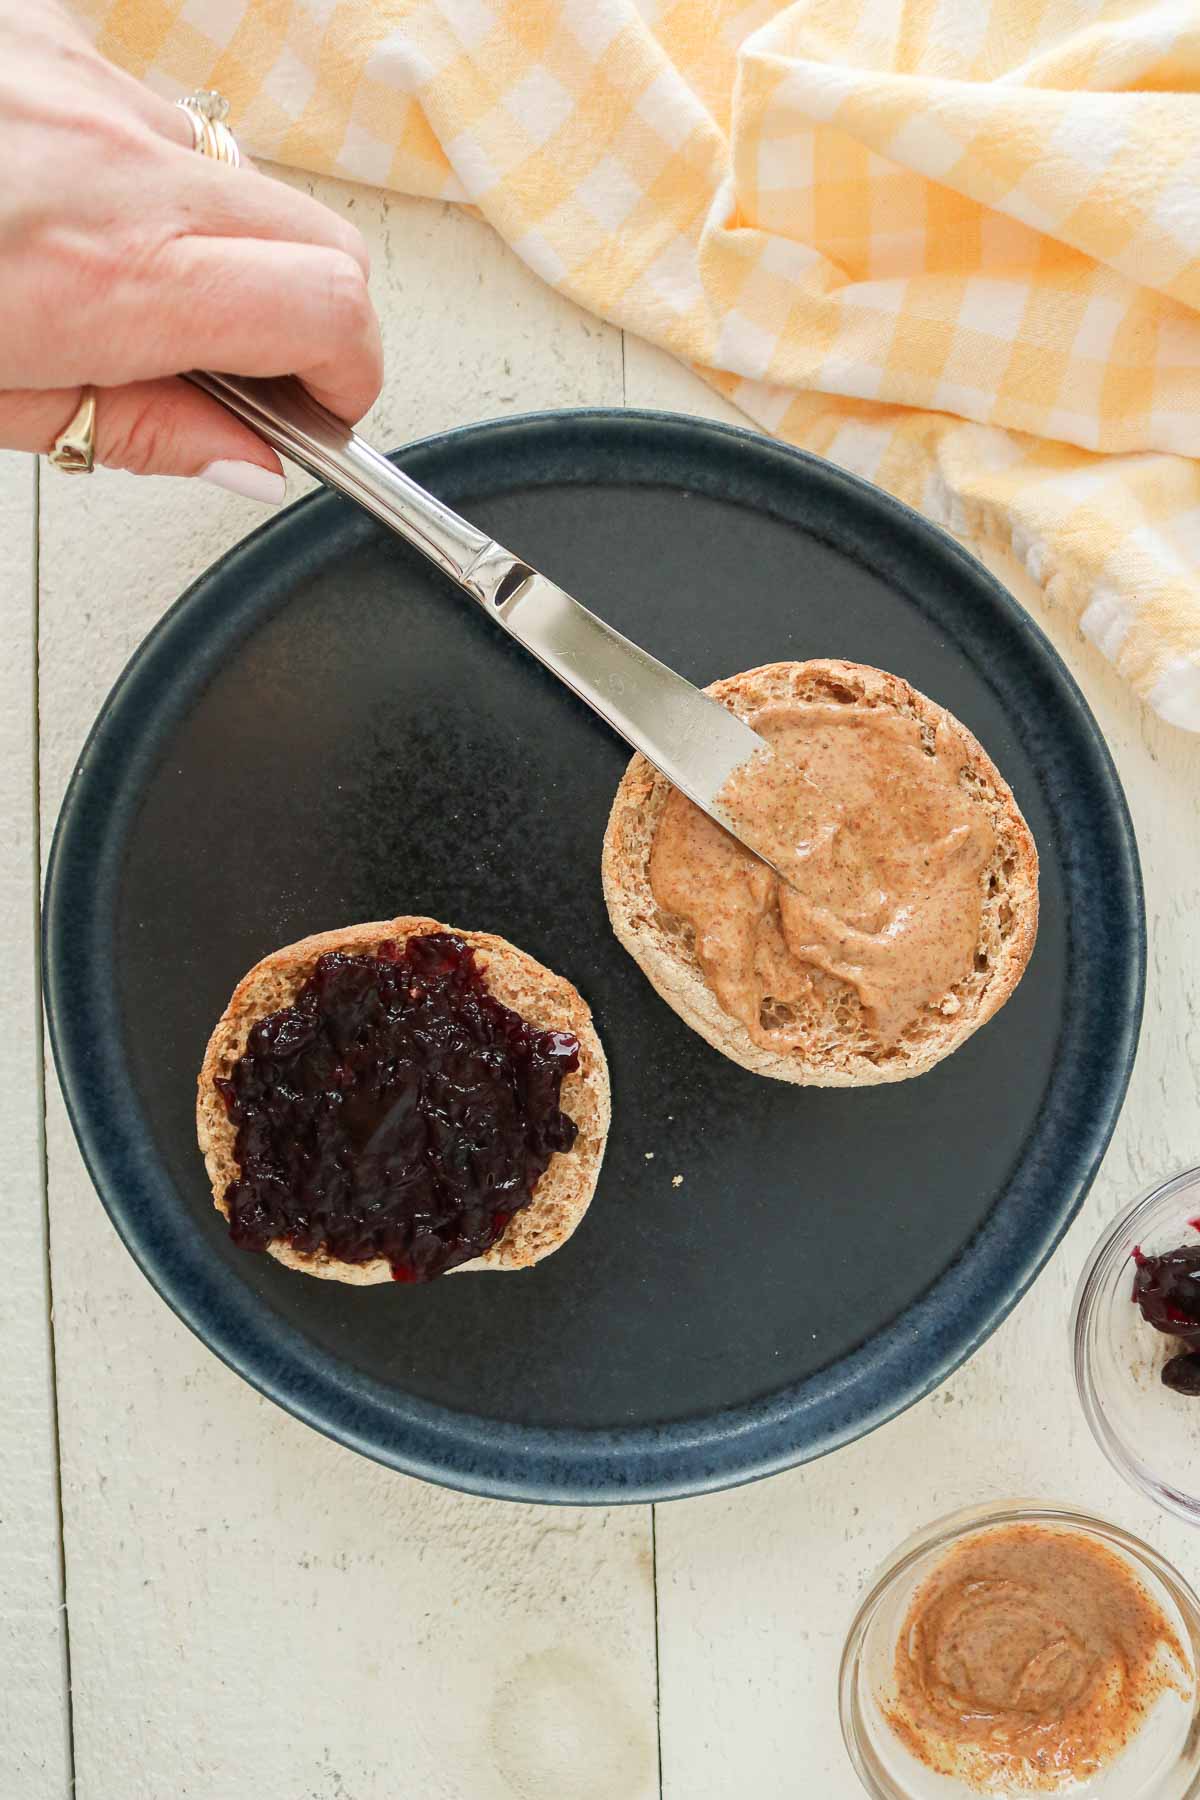 Spreading almond butter and jam over an English muffin.